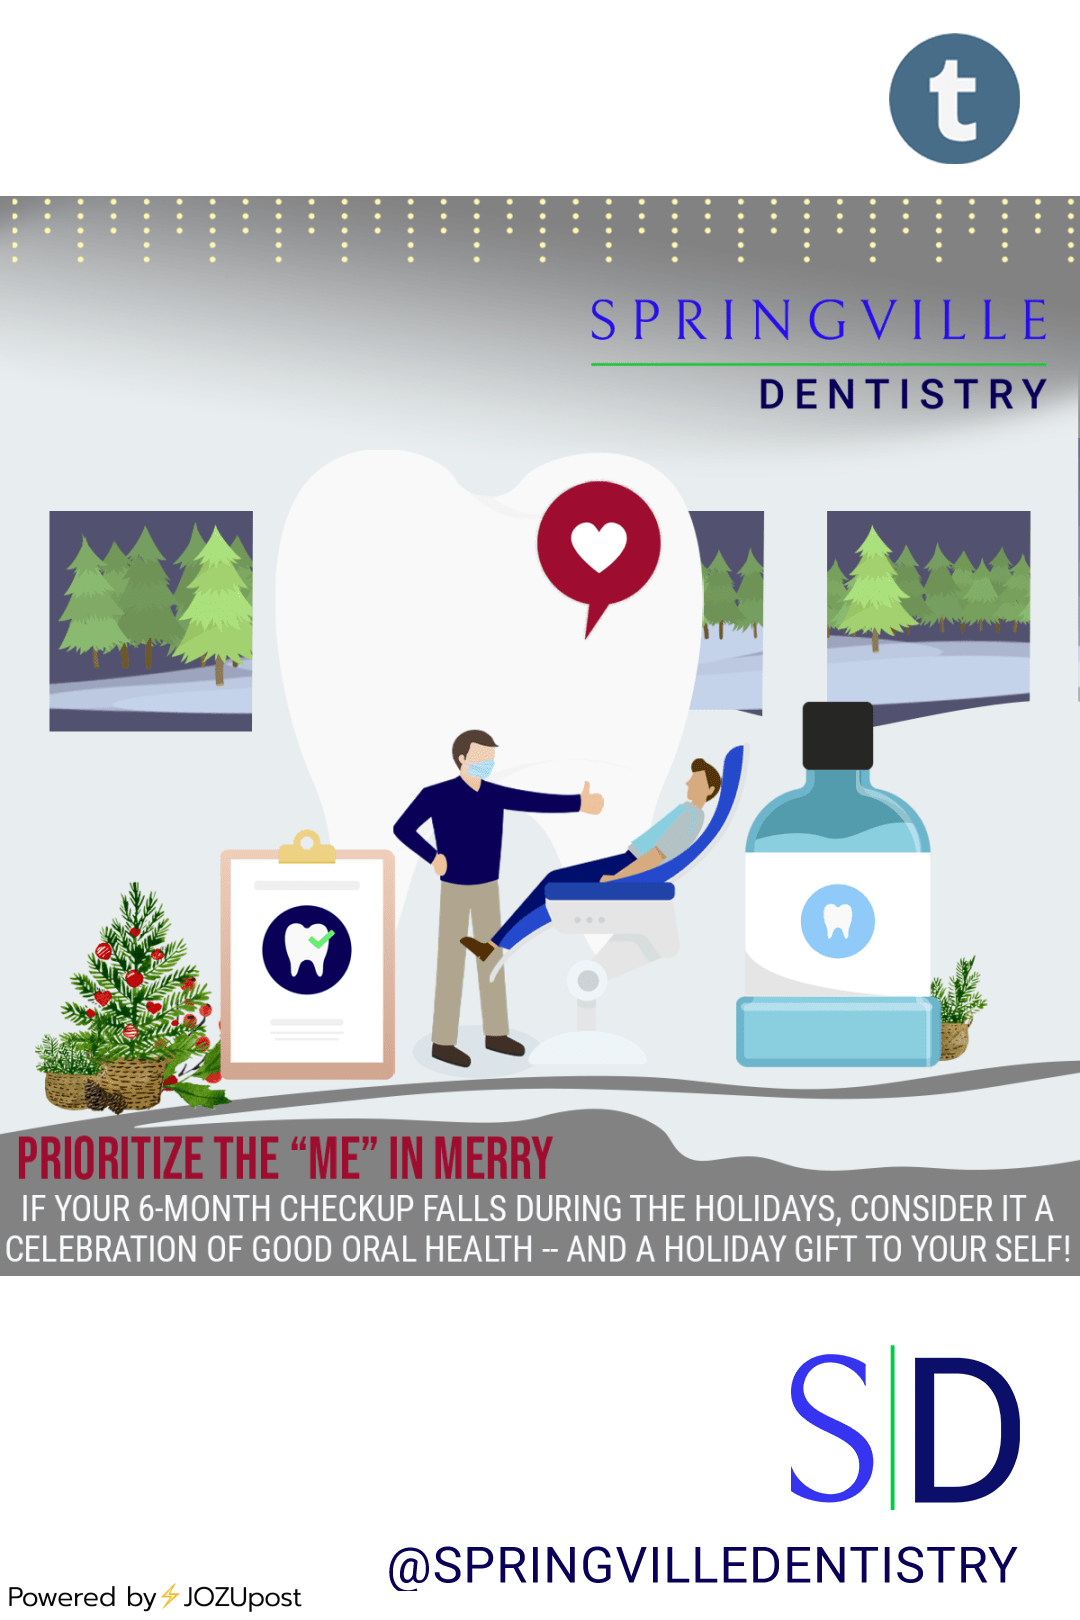 Prioritize the “me” in merry! If your 6-month checkup falls during the holidays, consider it a celebration of good oral health – and a holiday gift to your self.
•
•
•
•
#springvilledentistry #springvilleutah #dental #dentist #dentistry #smile #teeth...